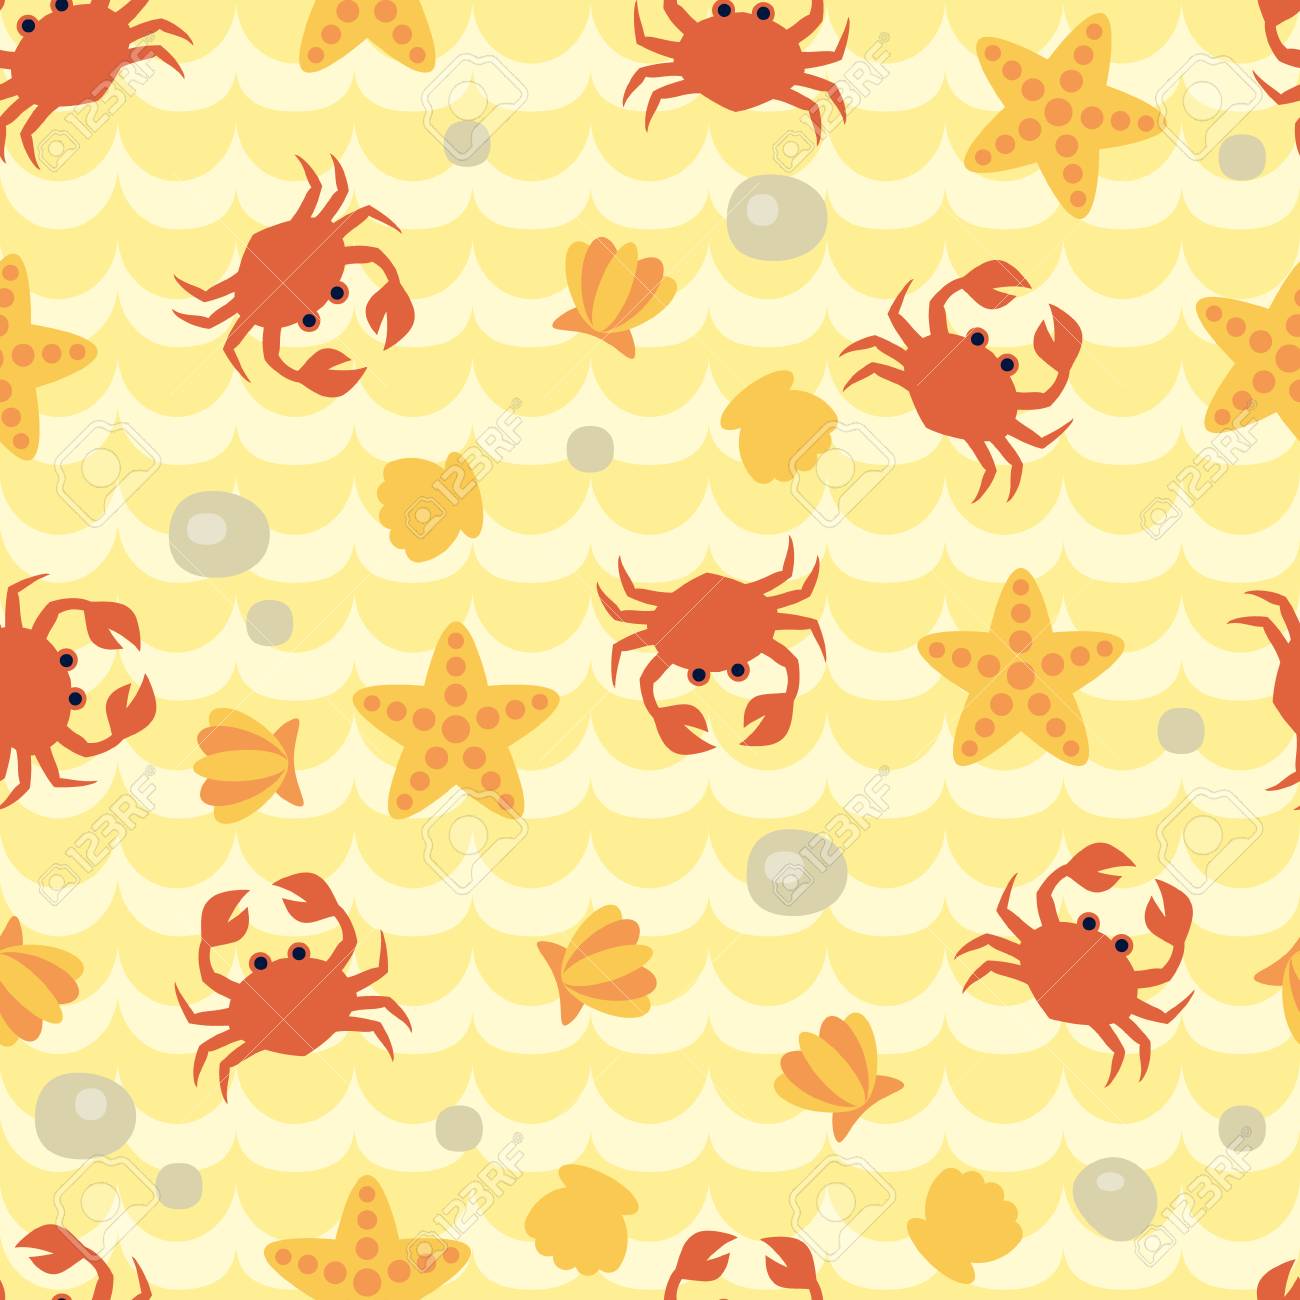 Seamless Pattern With Cute Cartoon Crabs Seashells And Starfishes